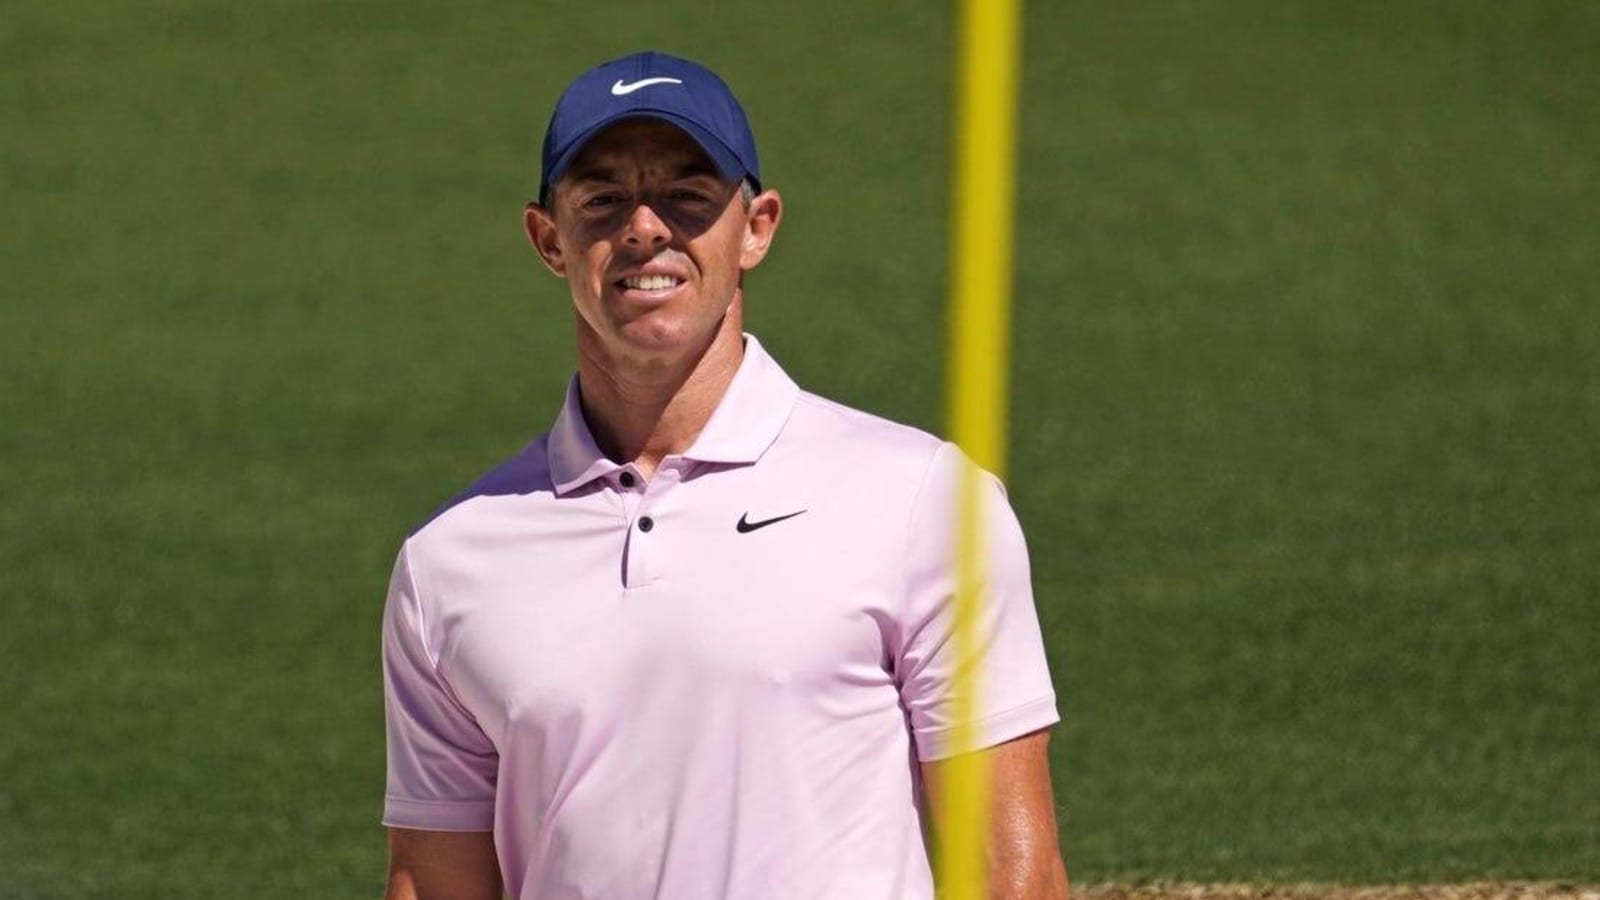 Rory McIlroy&#39;s agent: $850M LIV move is &#39;fake news&#39;